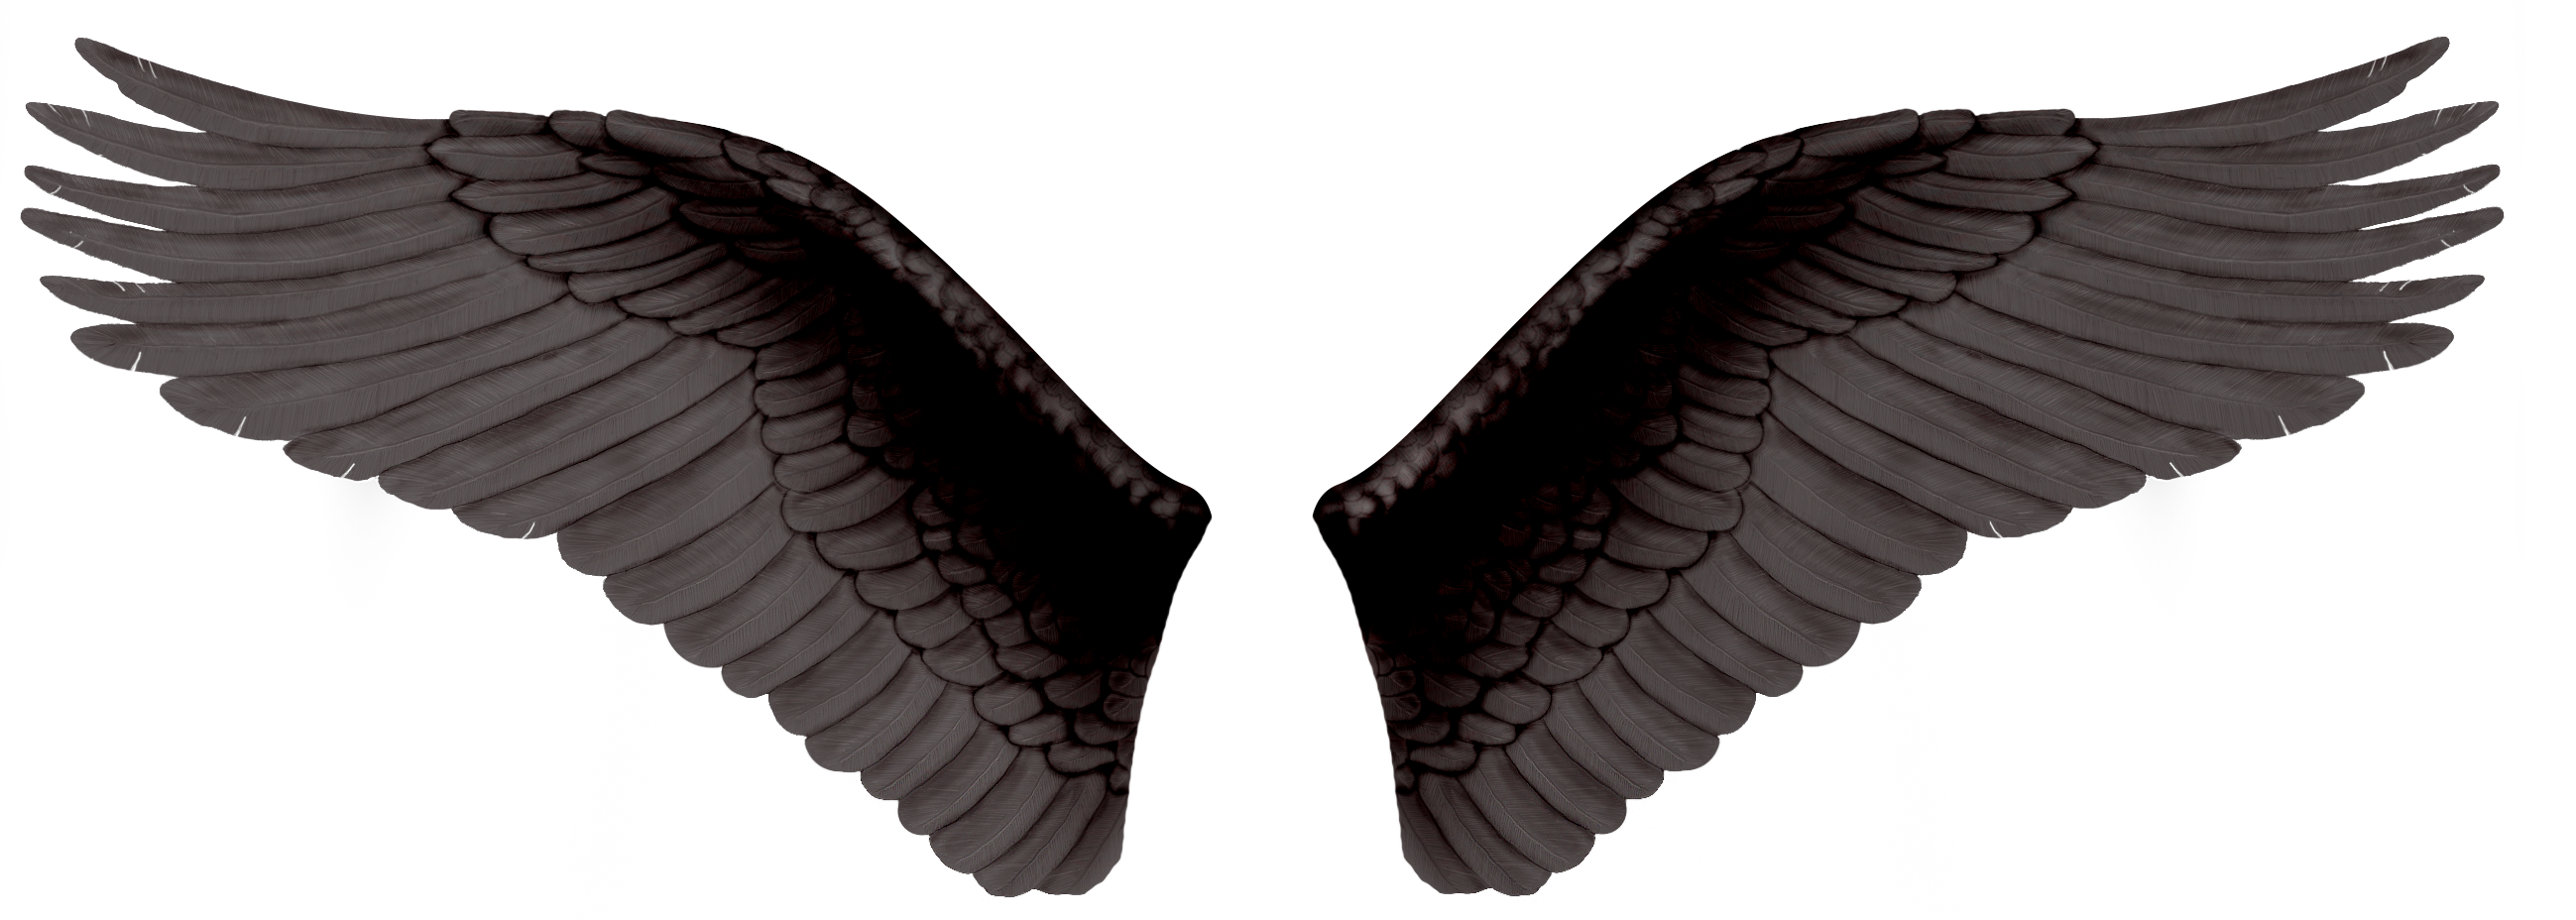 Wings Png Transparent Image Download Size 2598x928px